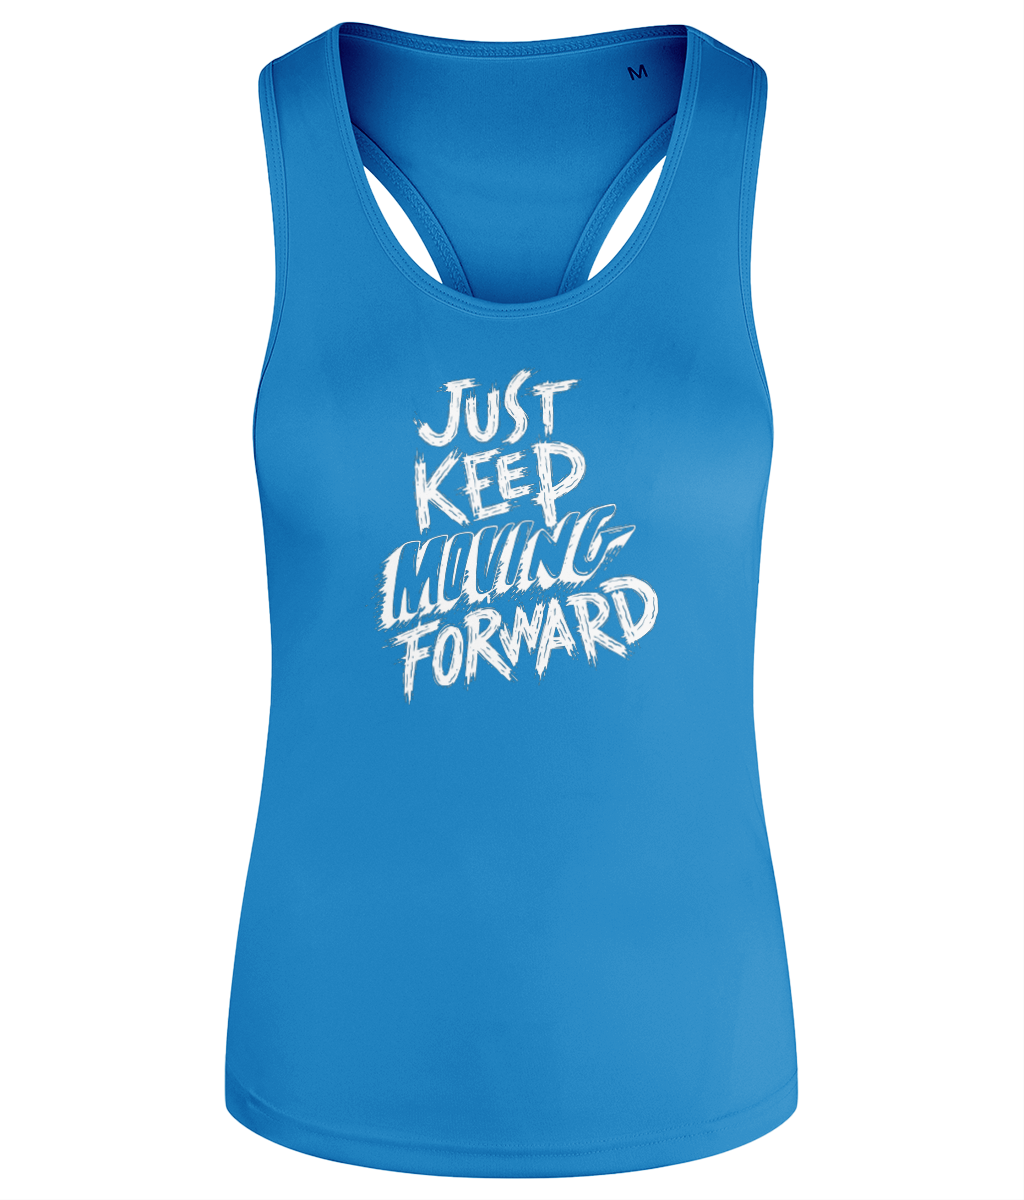 Gym Quote Women's Racerback Tank Top Vest - Keep Moving